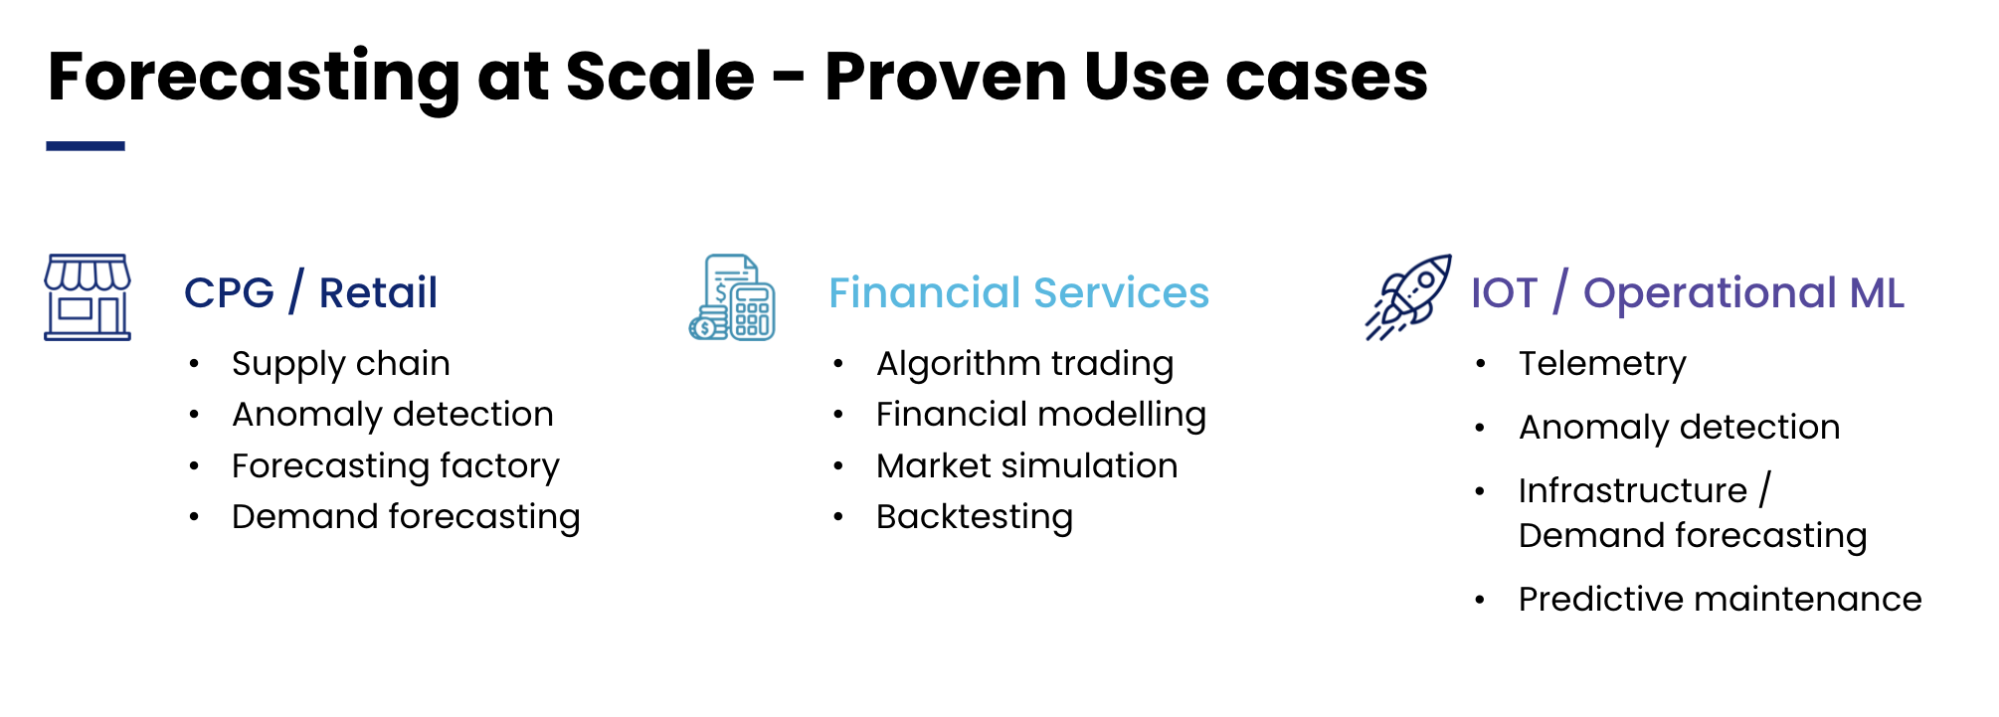 Forecasting use cases